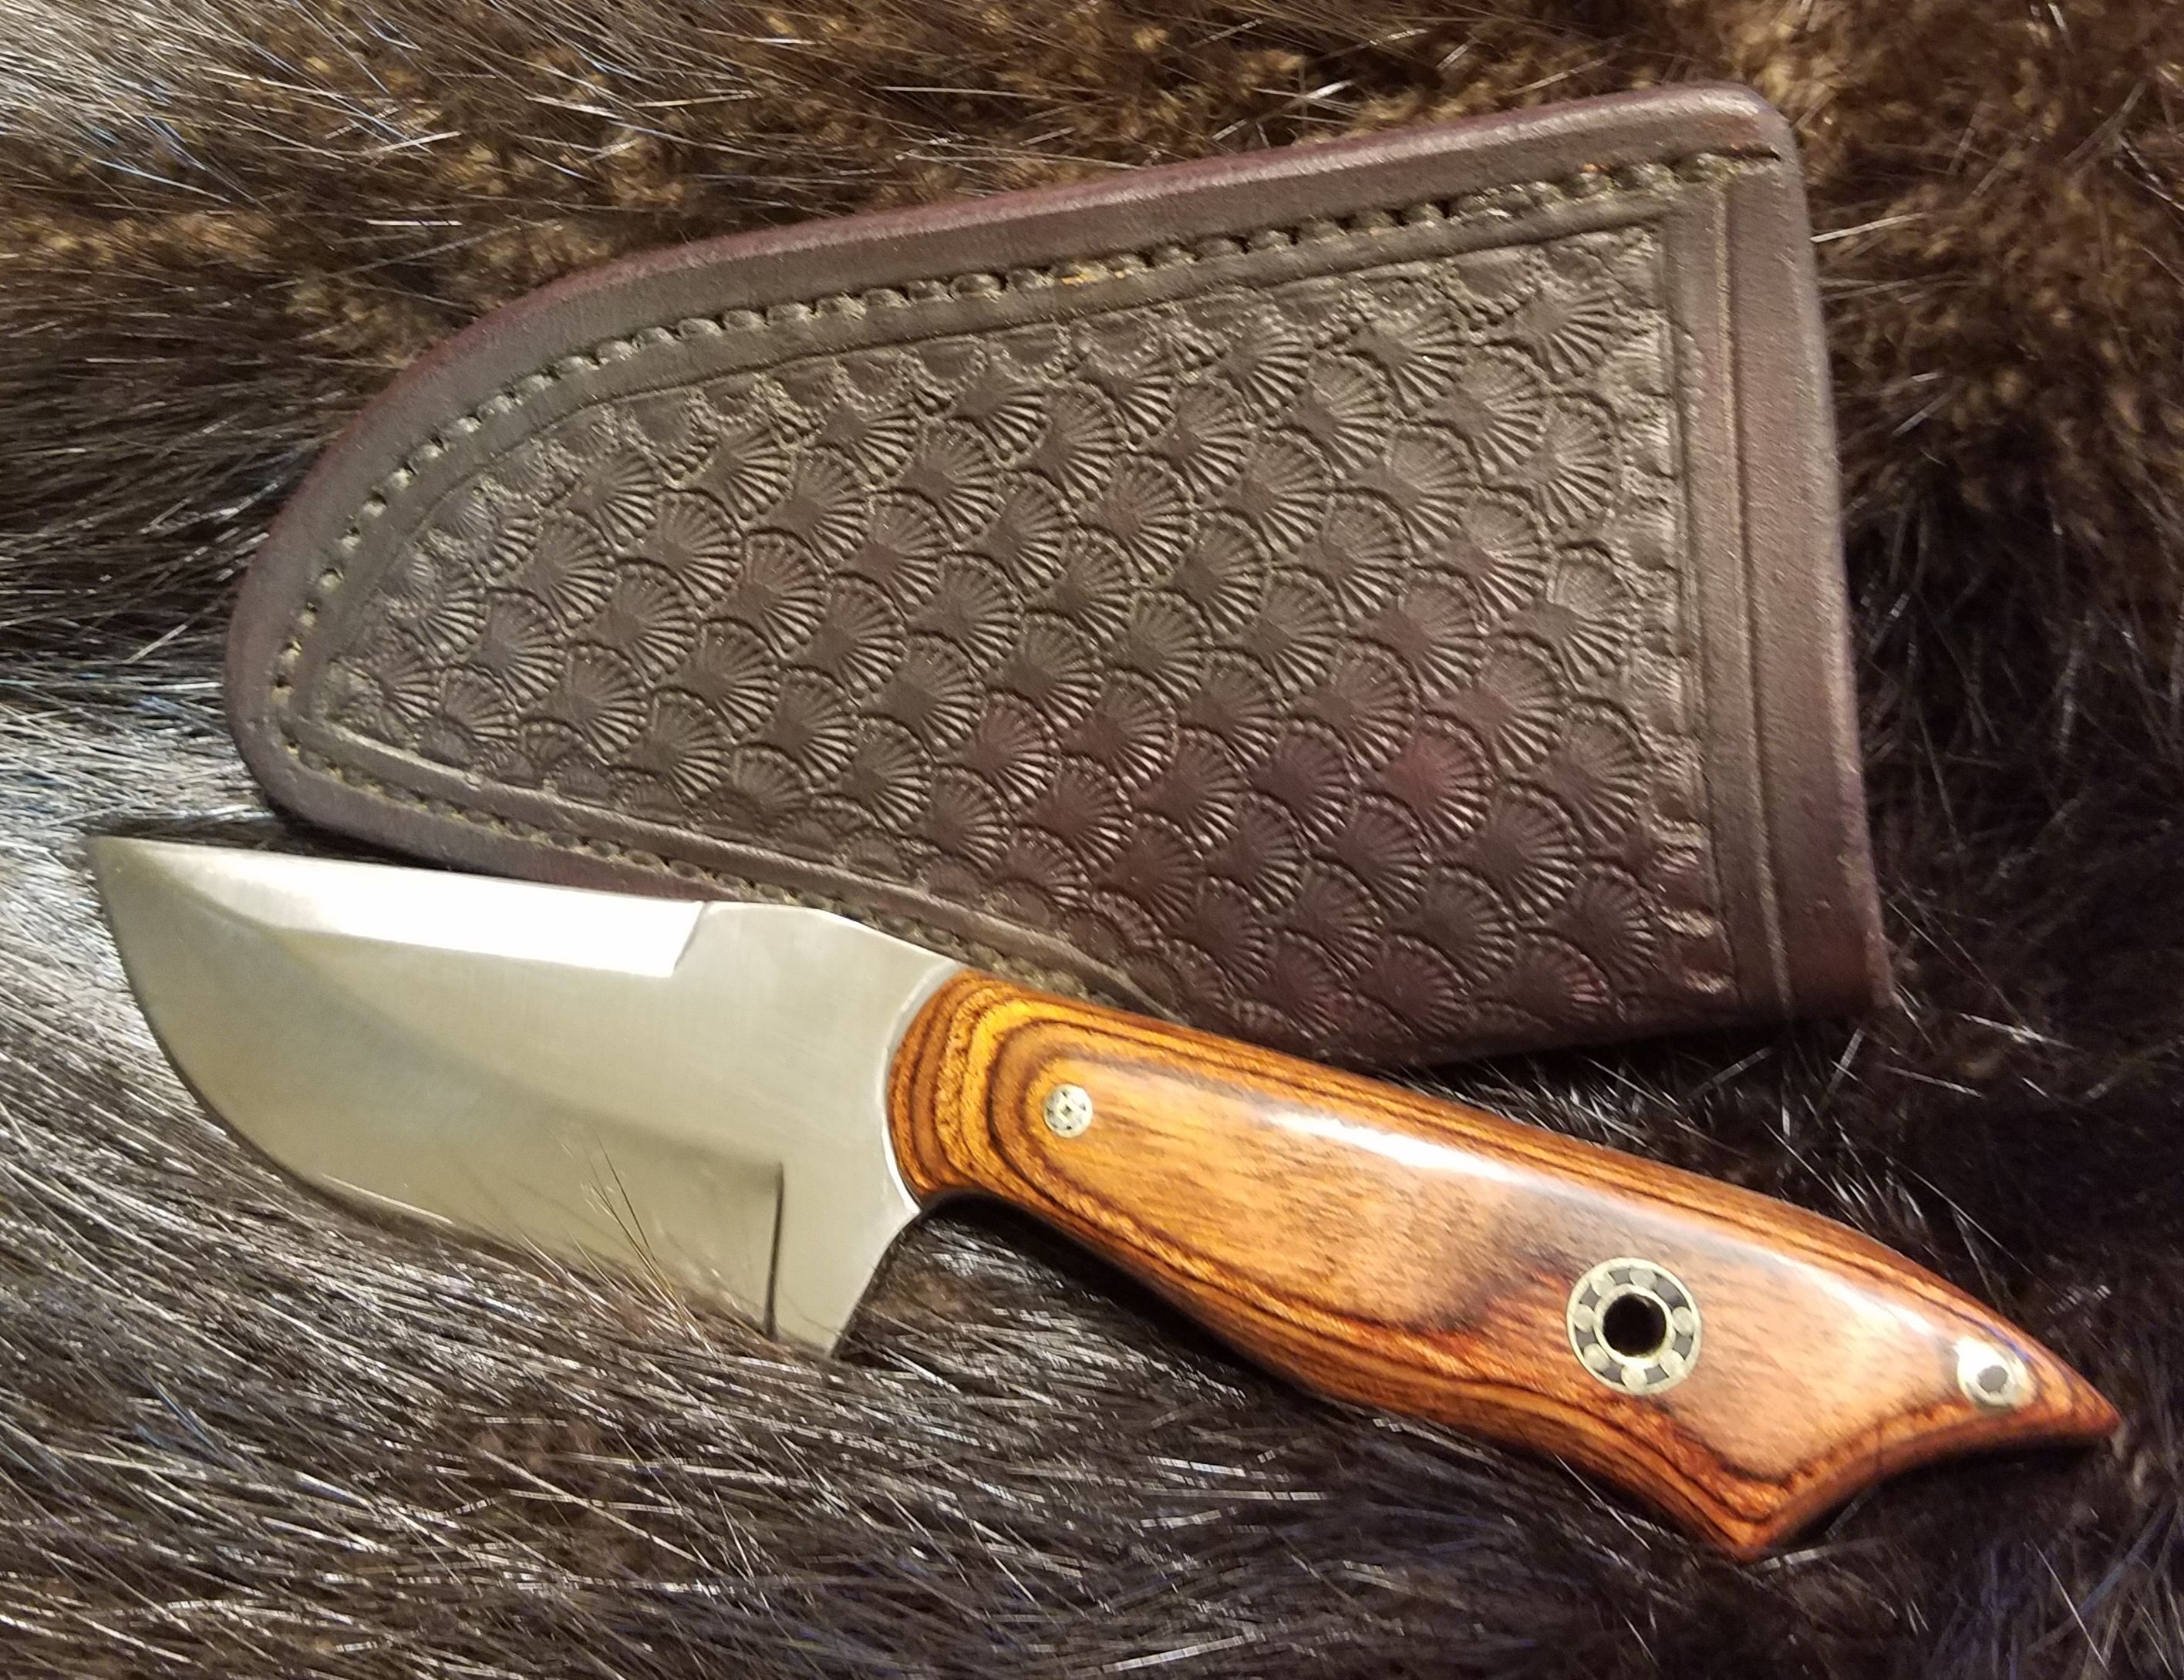 Skinner, with Cocobolo Dymondwood handle, Hand tooled, hand stitched Leather Sheath,   $185.00